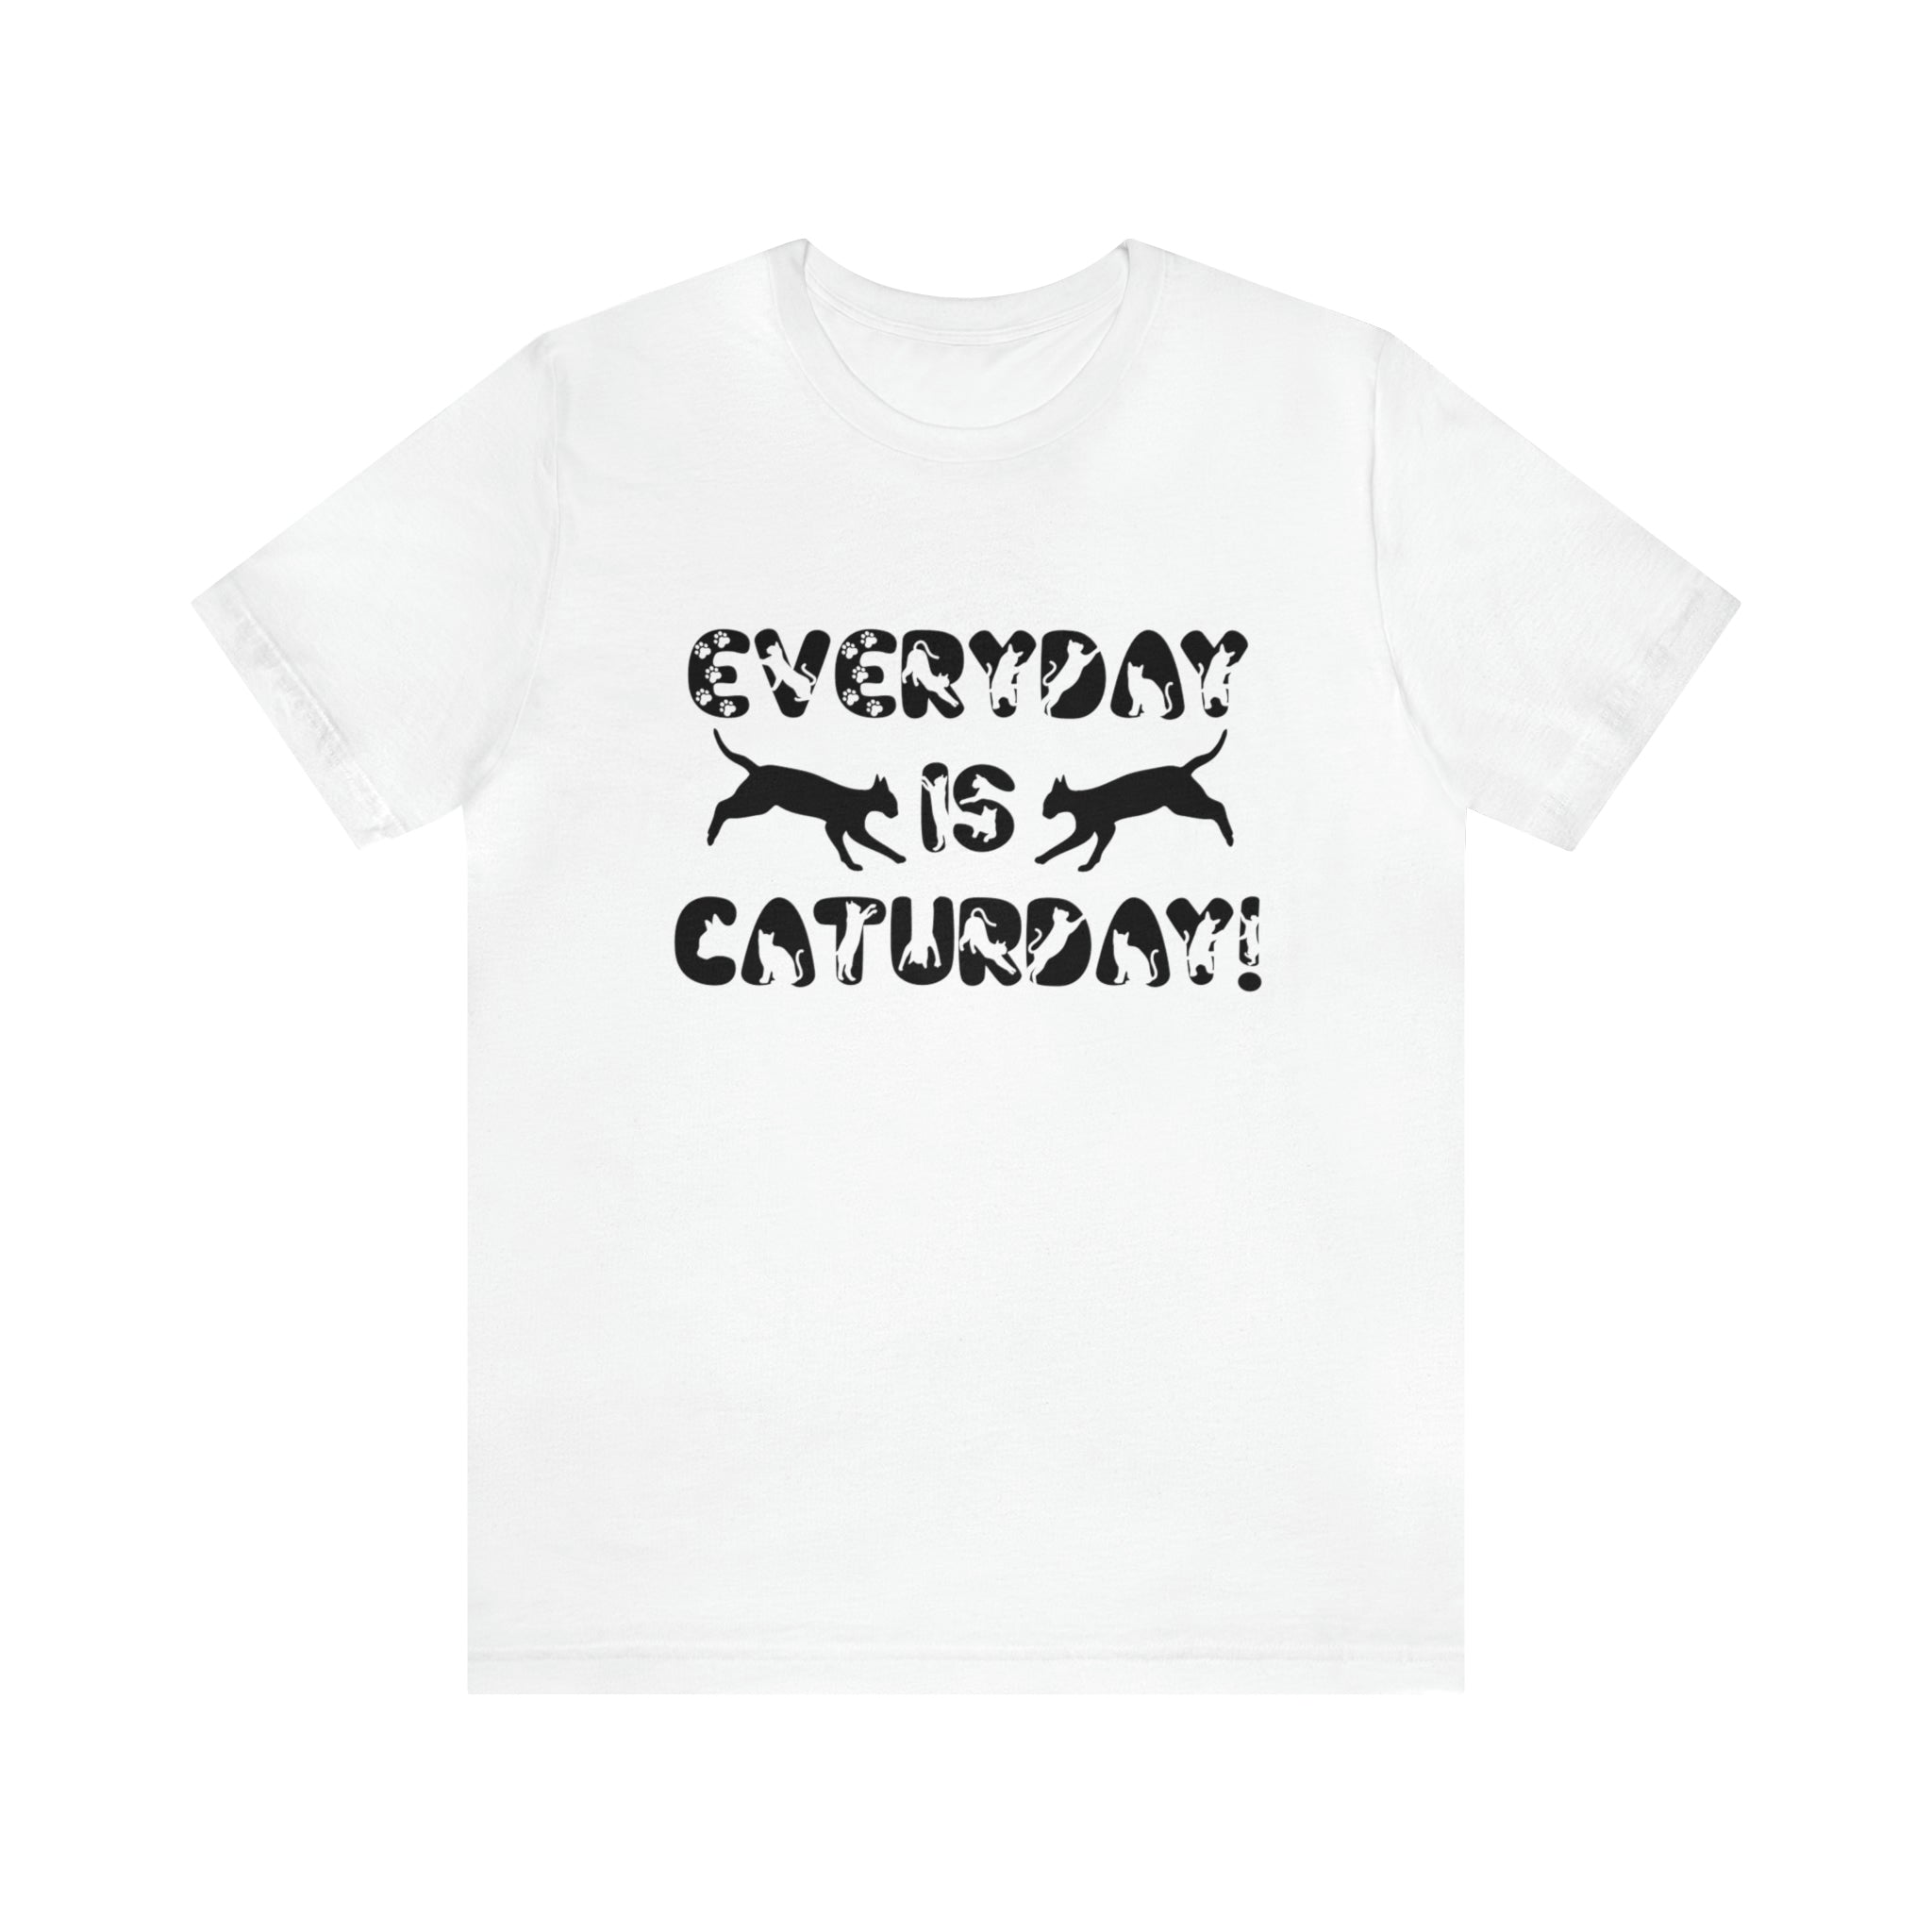 Everyday is caturday t-shirt white